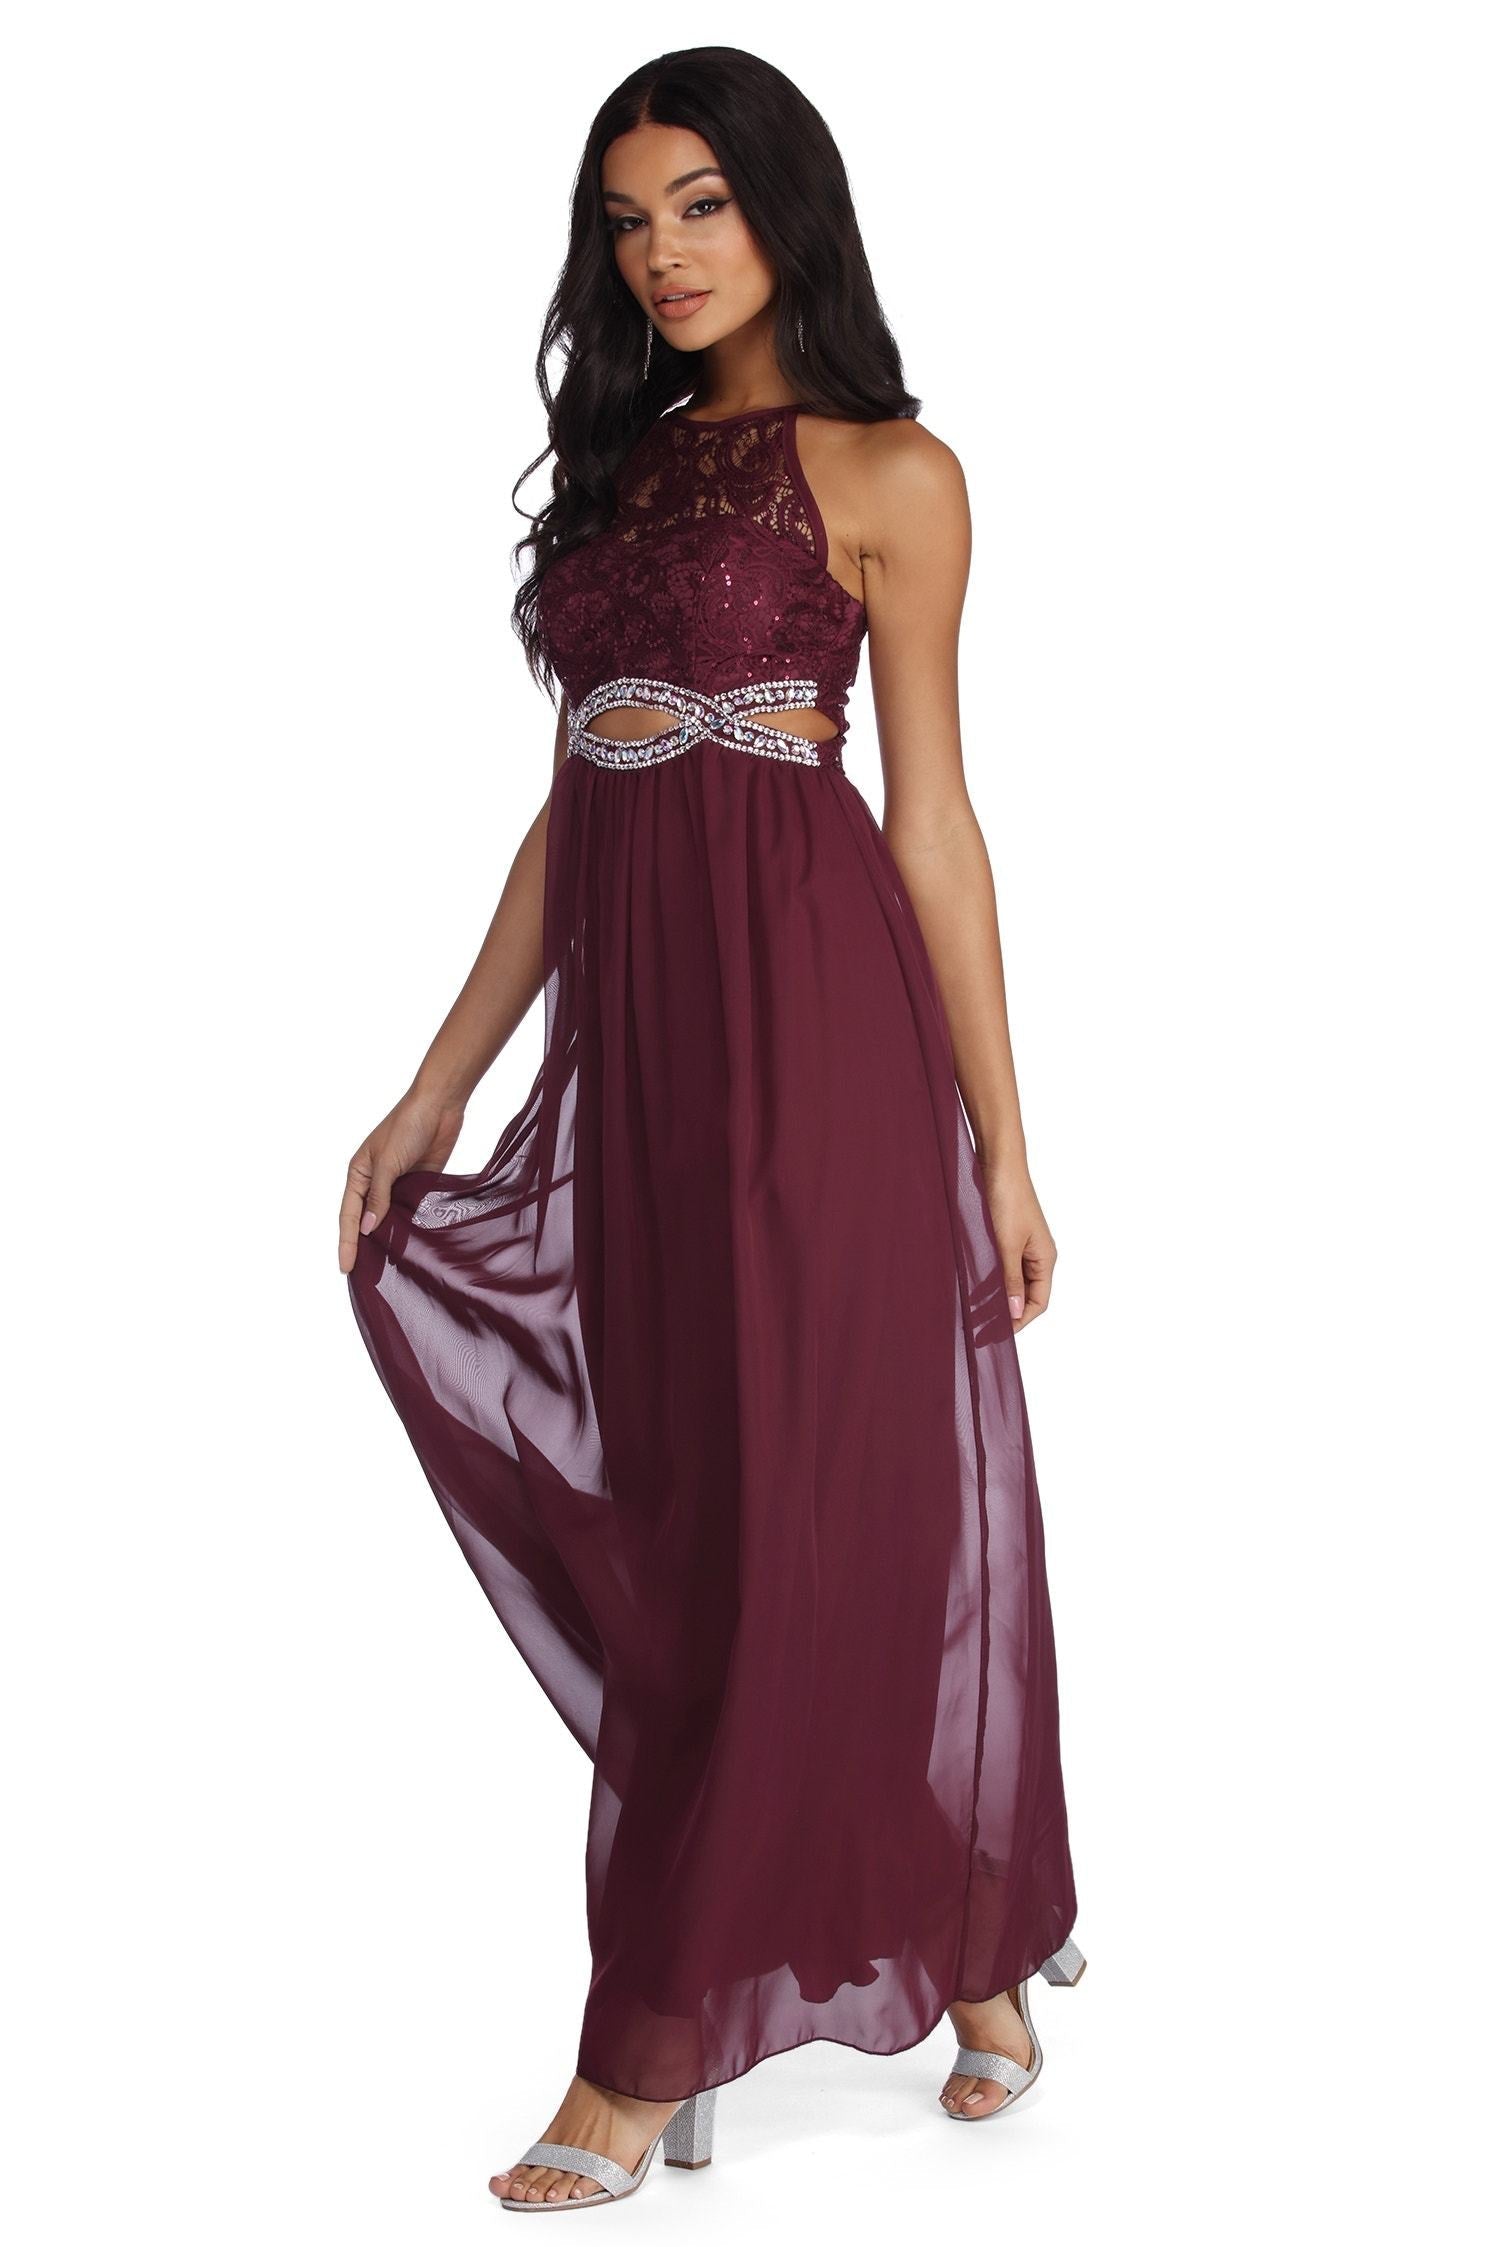 Anya Formal Lace And Gemstone Dresses